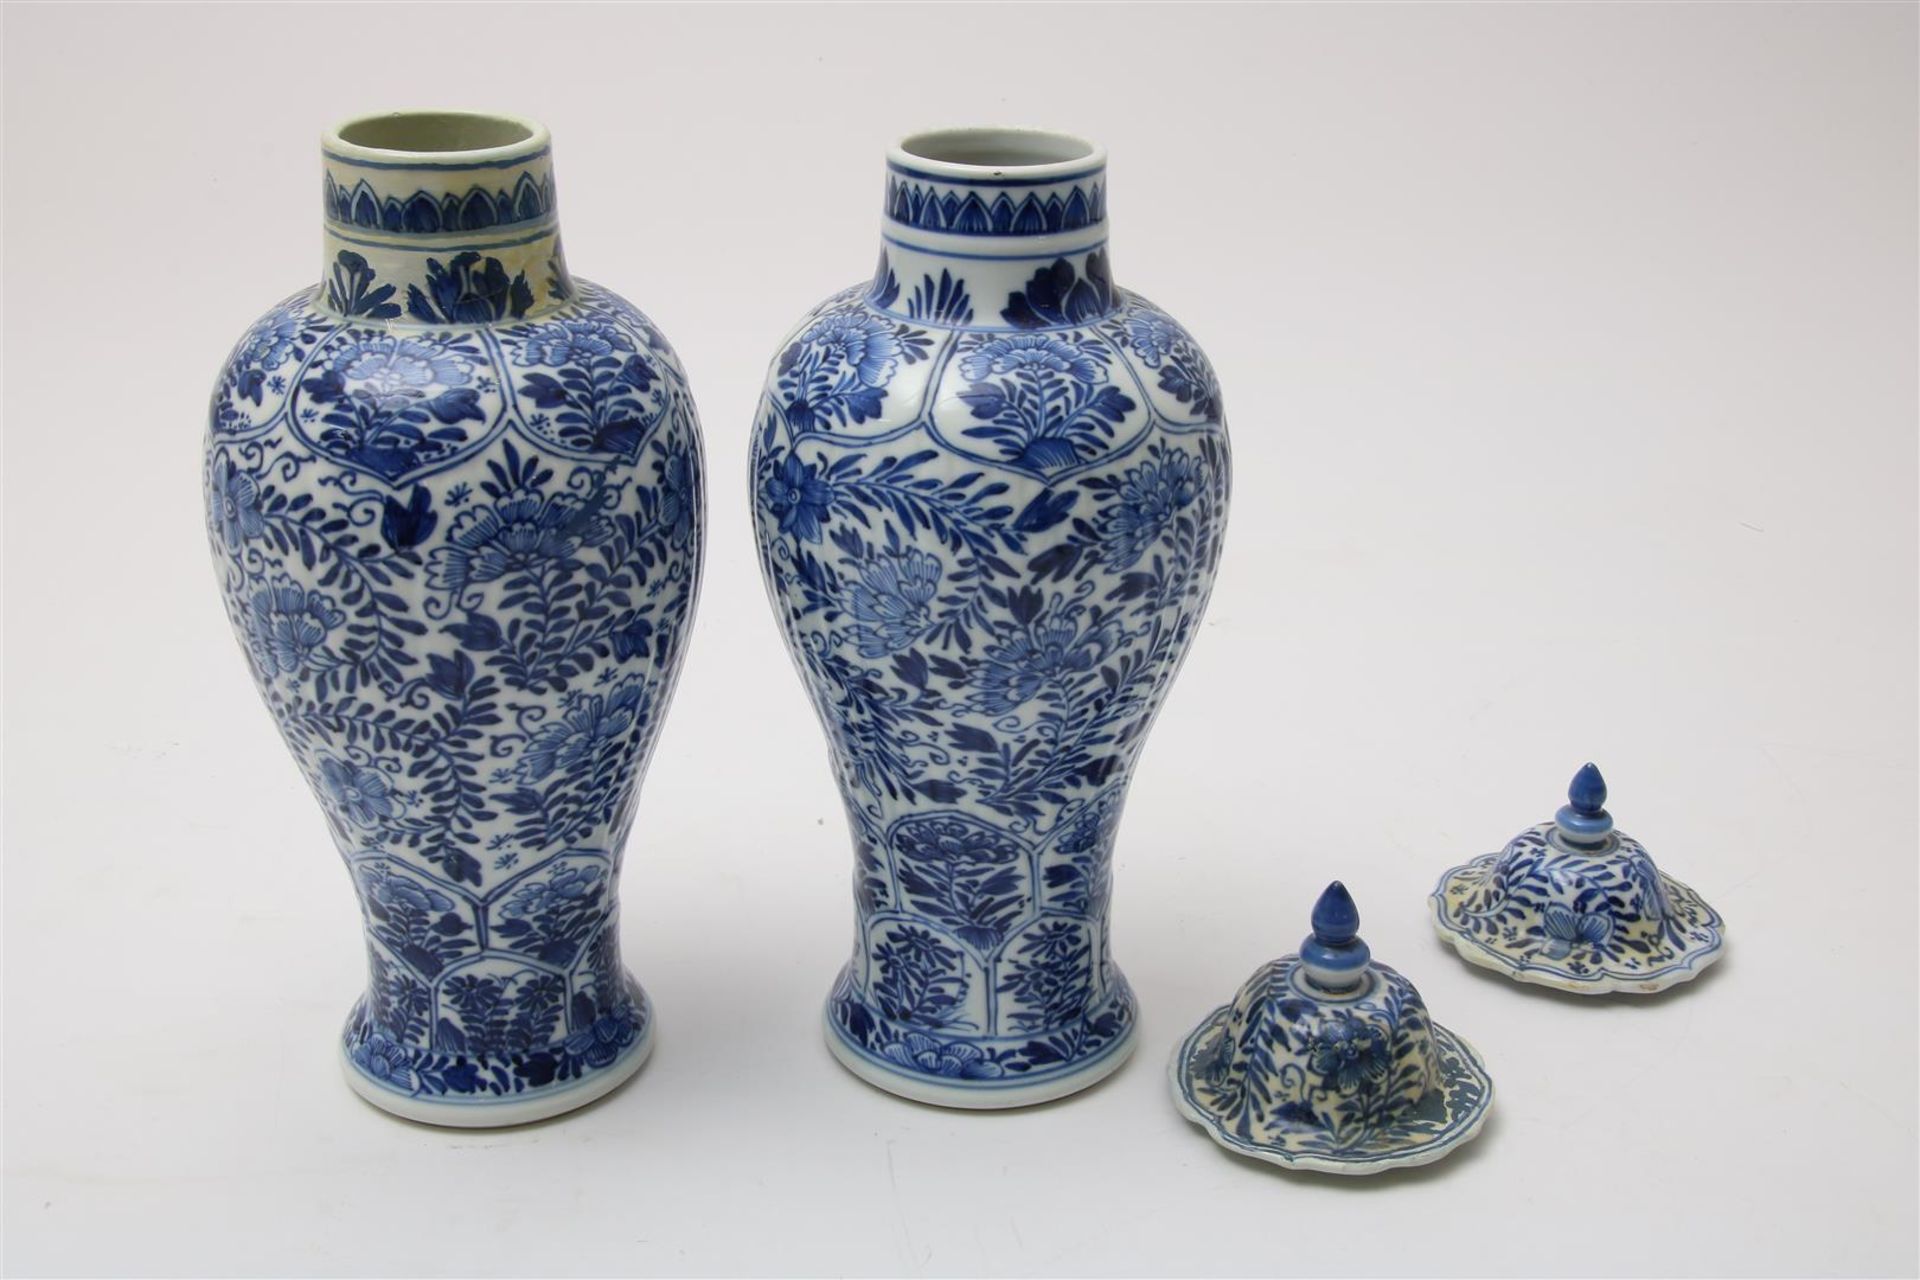 Set of porcelain baluster-shaped lidded vases with cartouches and flowering shrubs decoration, China - Image 3 of 9